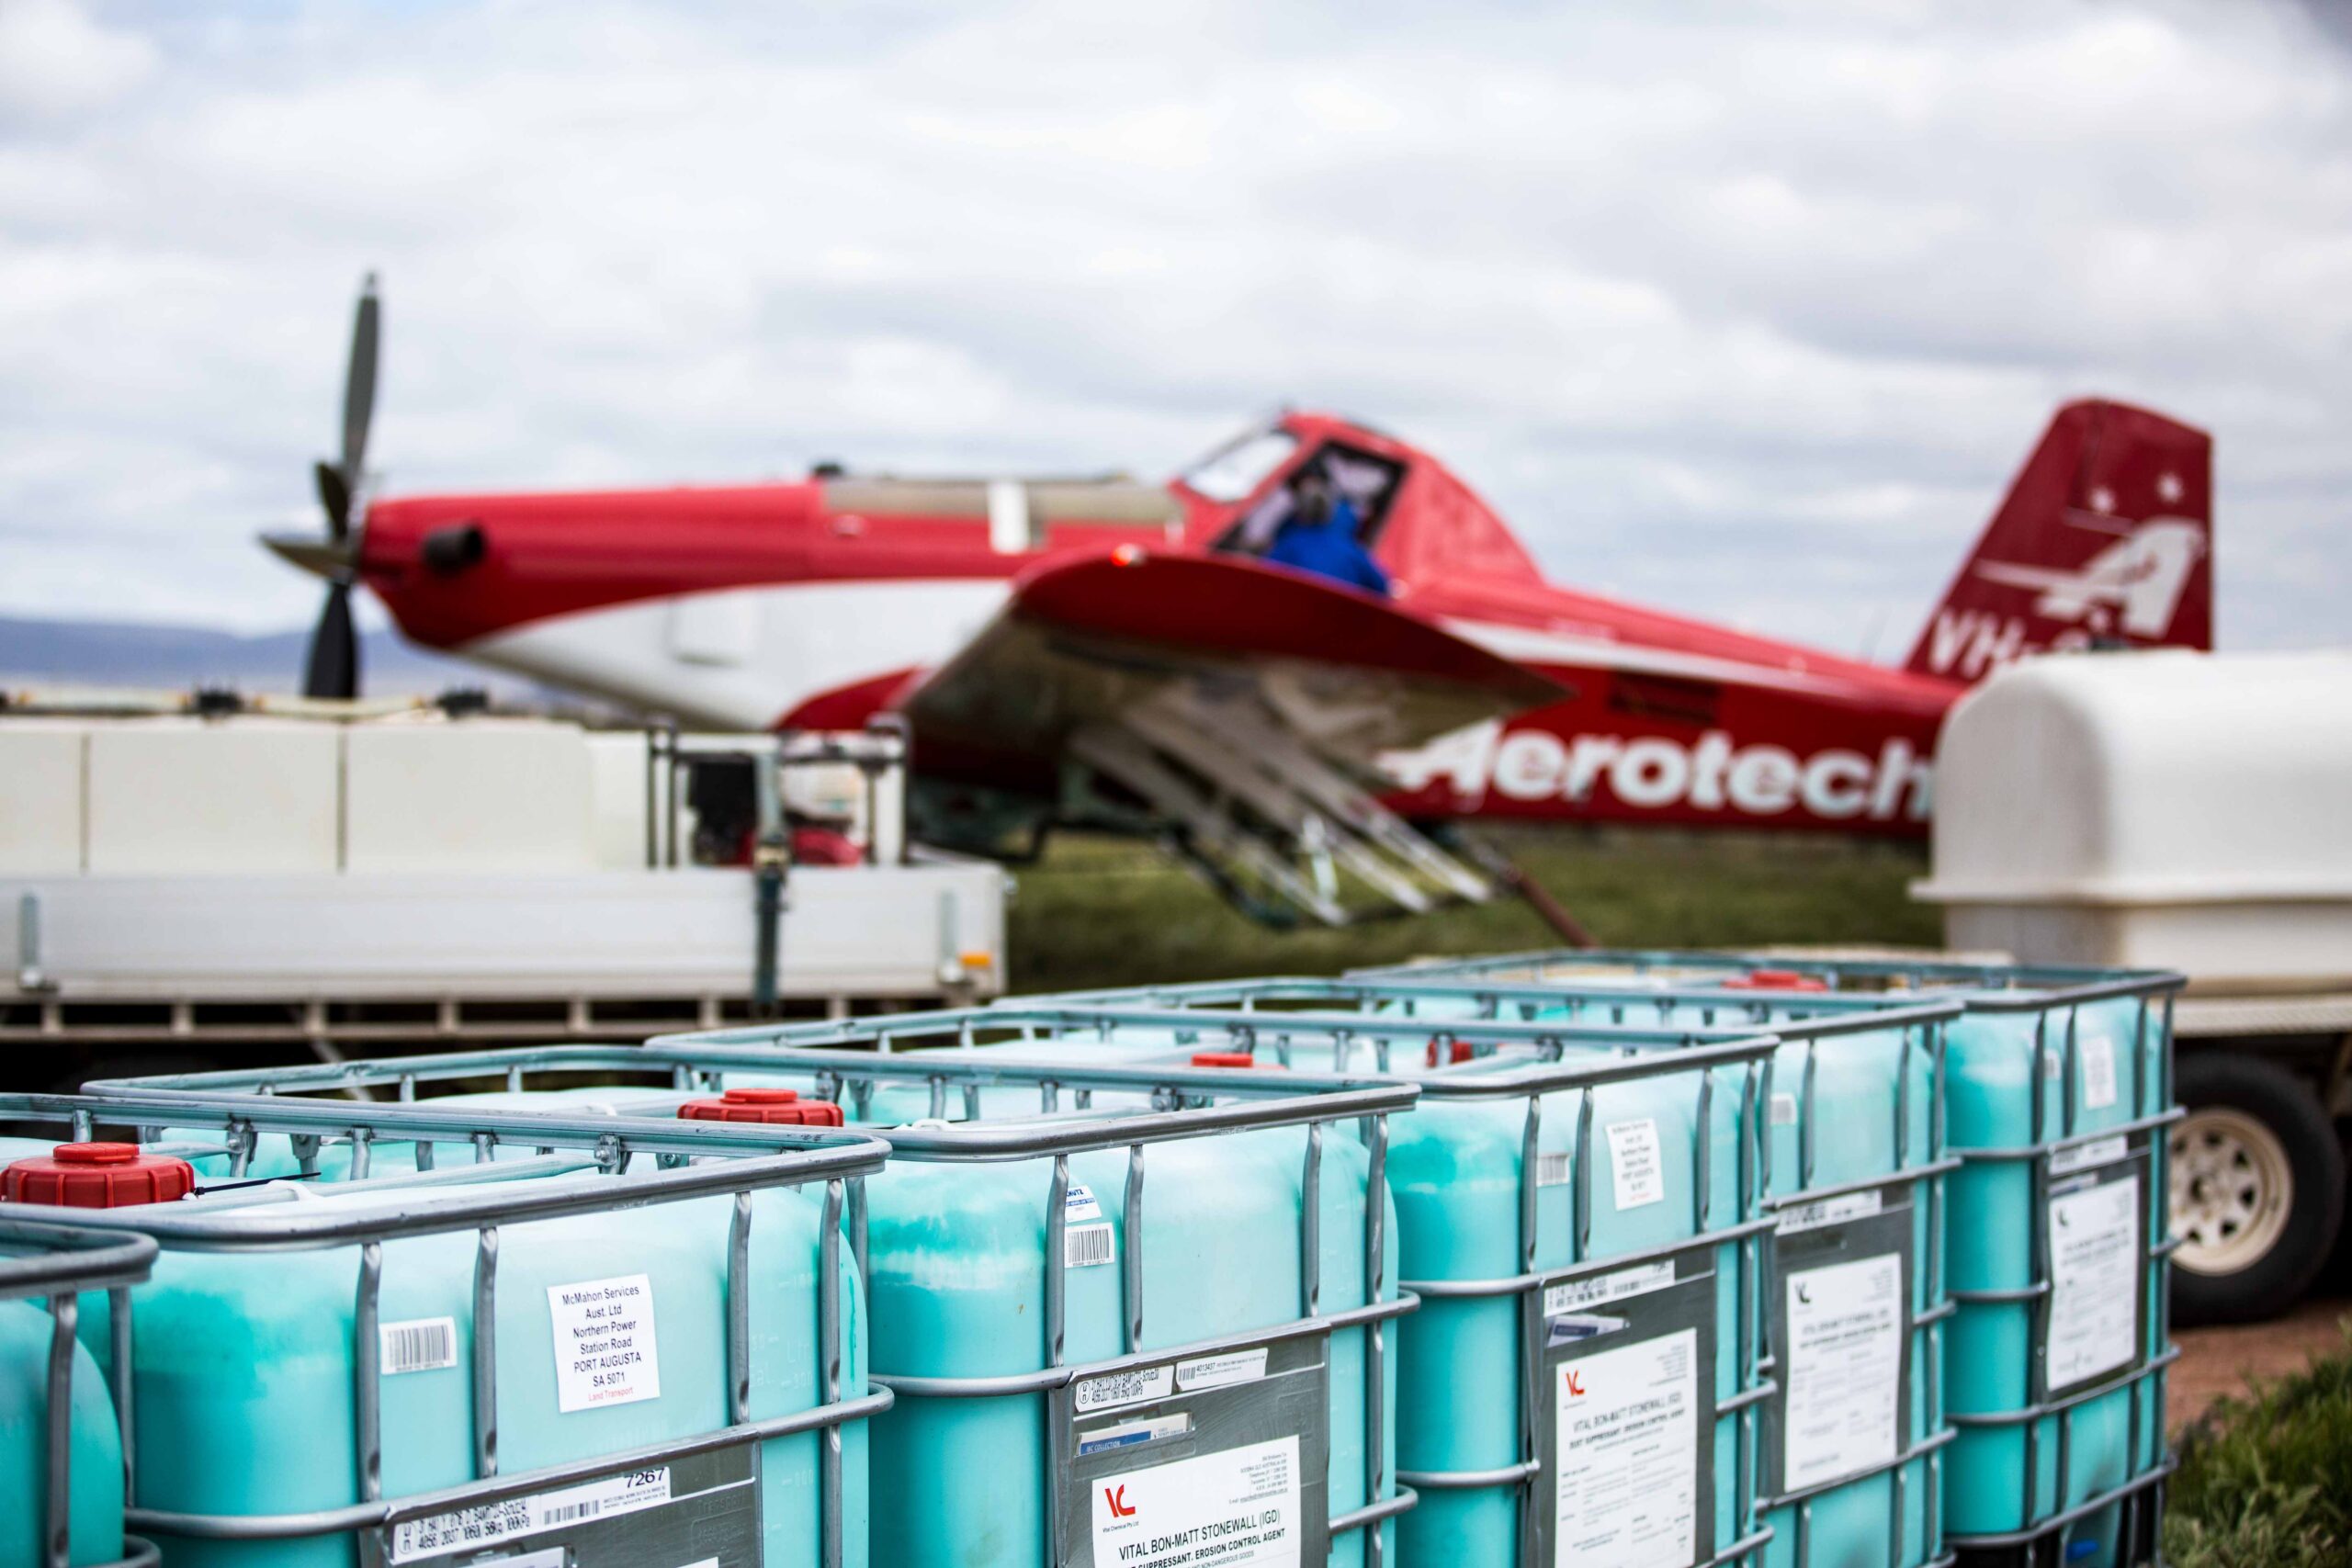 A red plane with barrels ready to be loaded